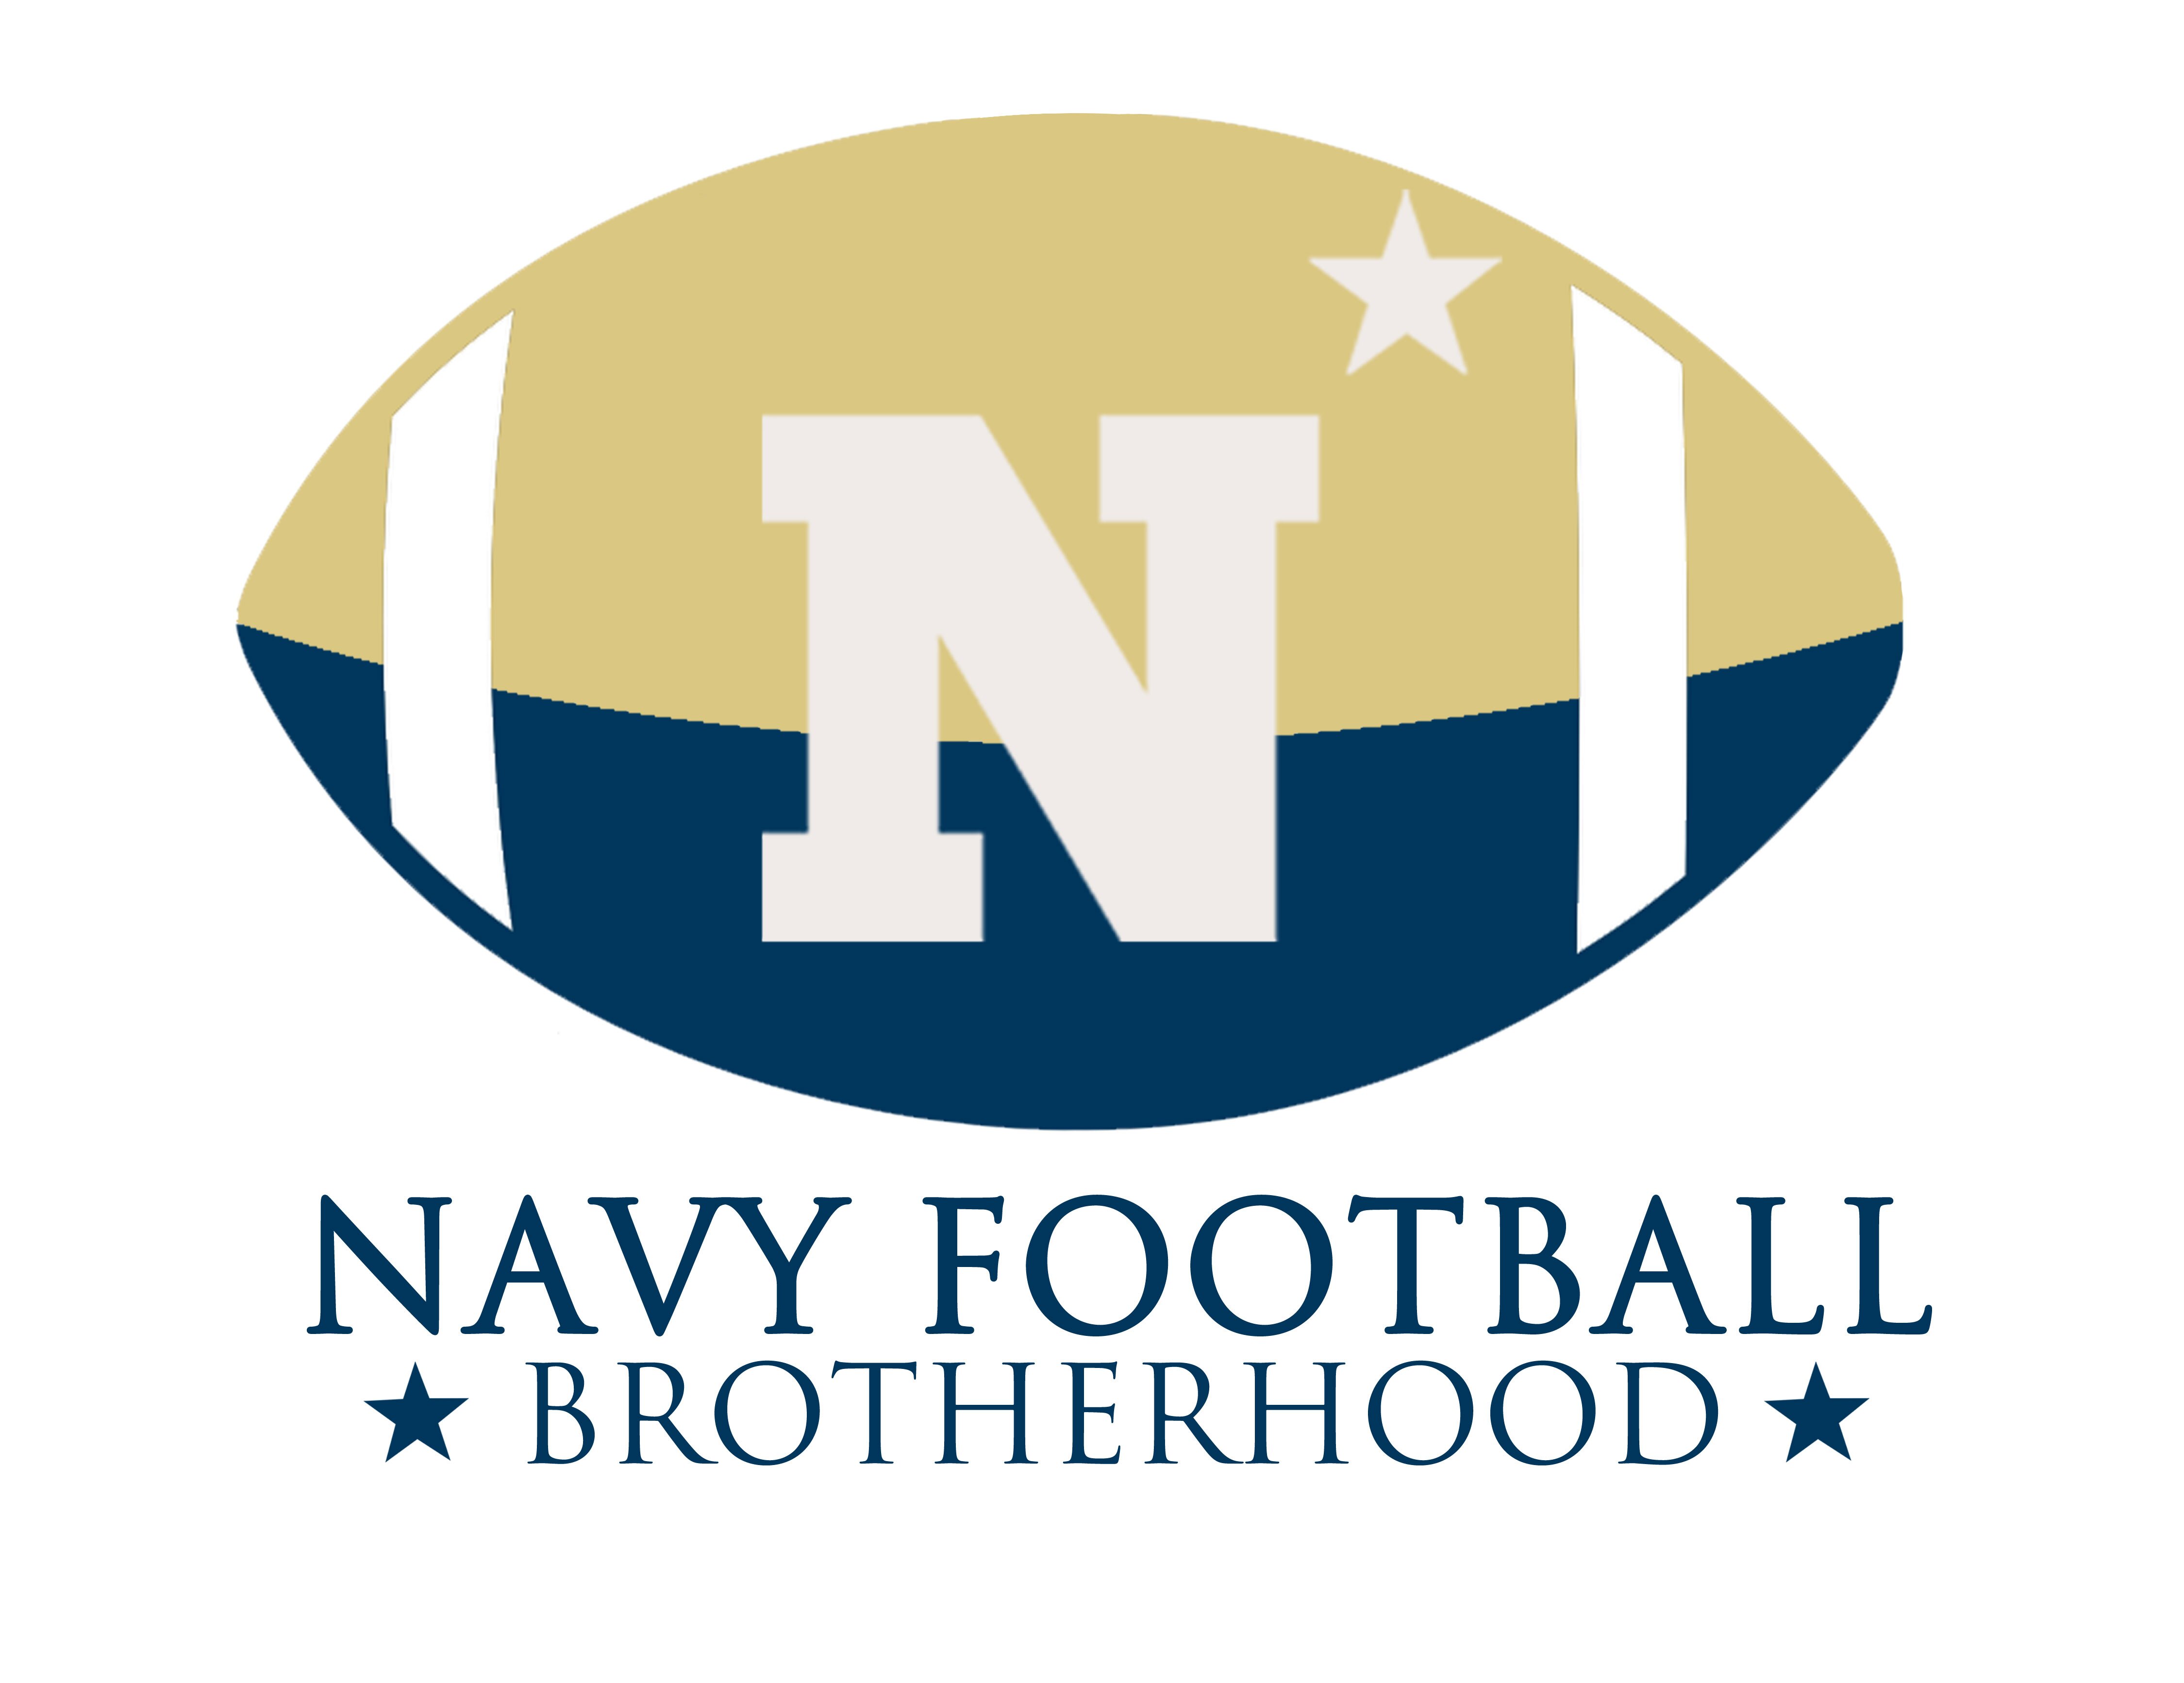 Serves and supports the United States Naval Academy Football Program and players of the past, present, and future.